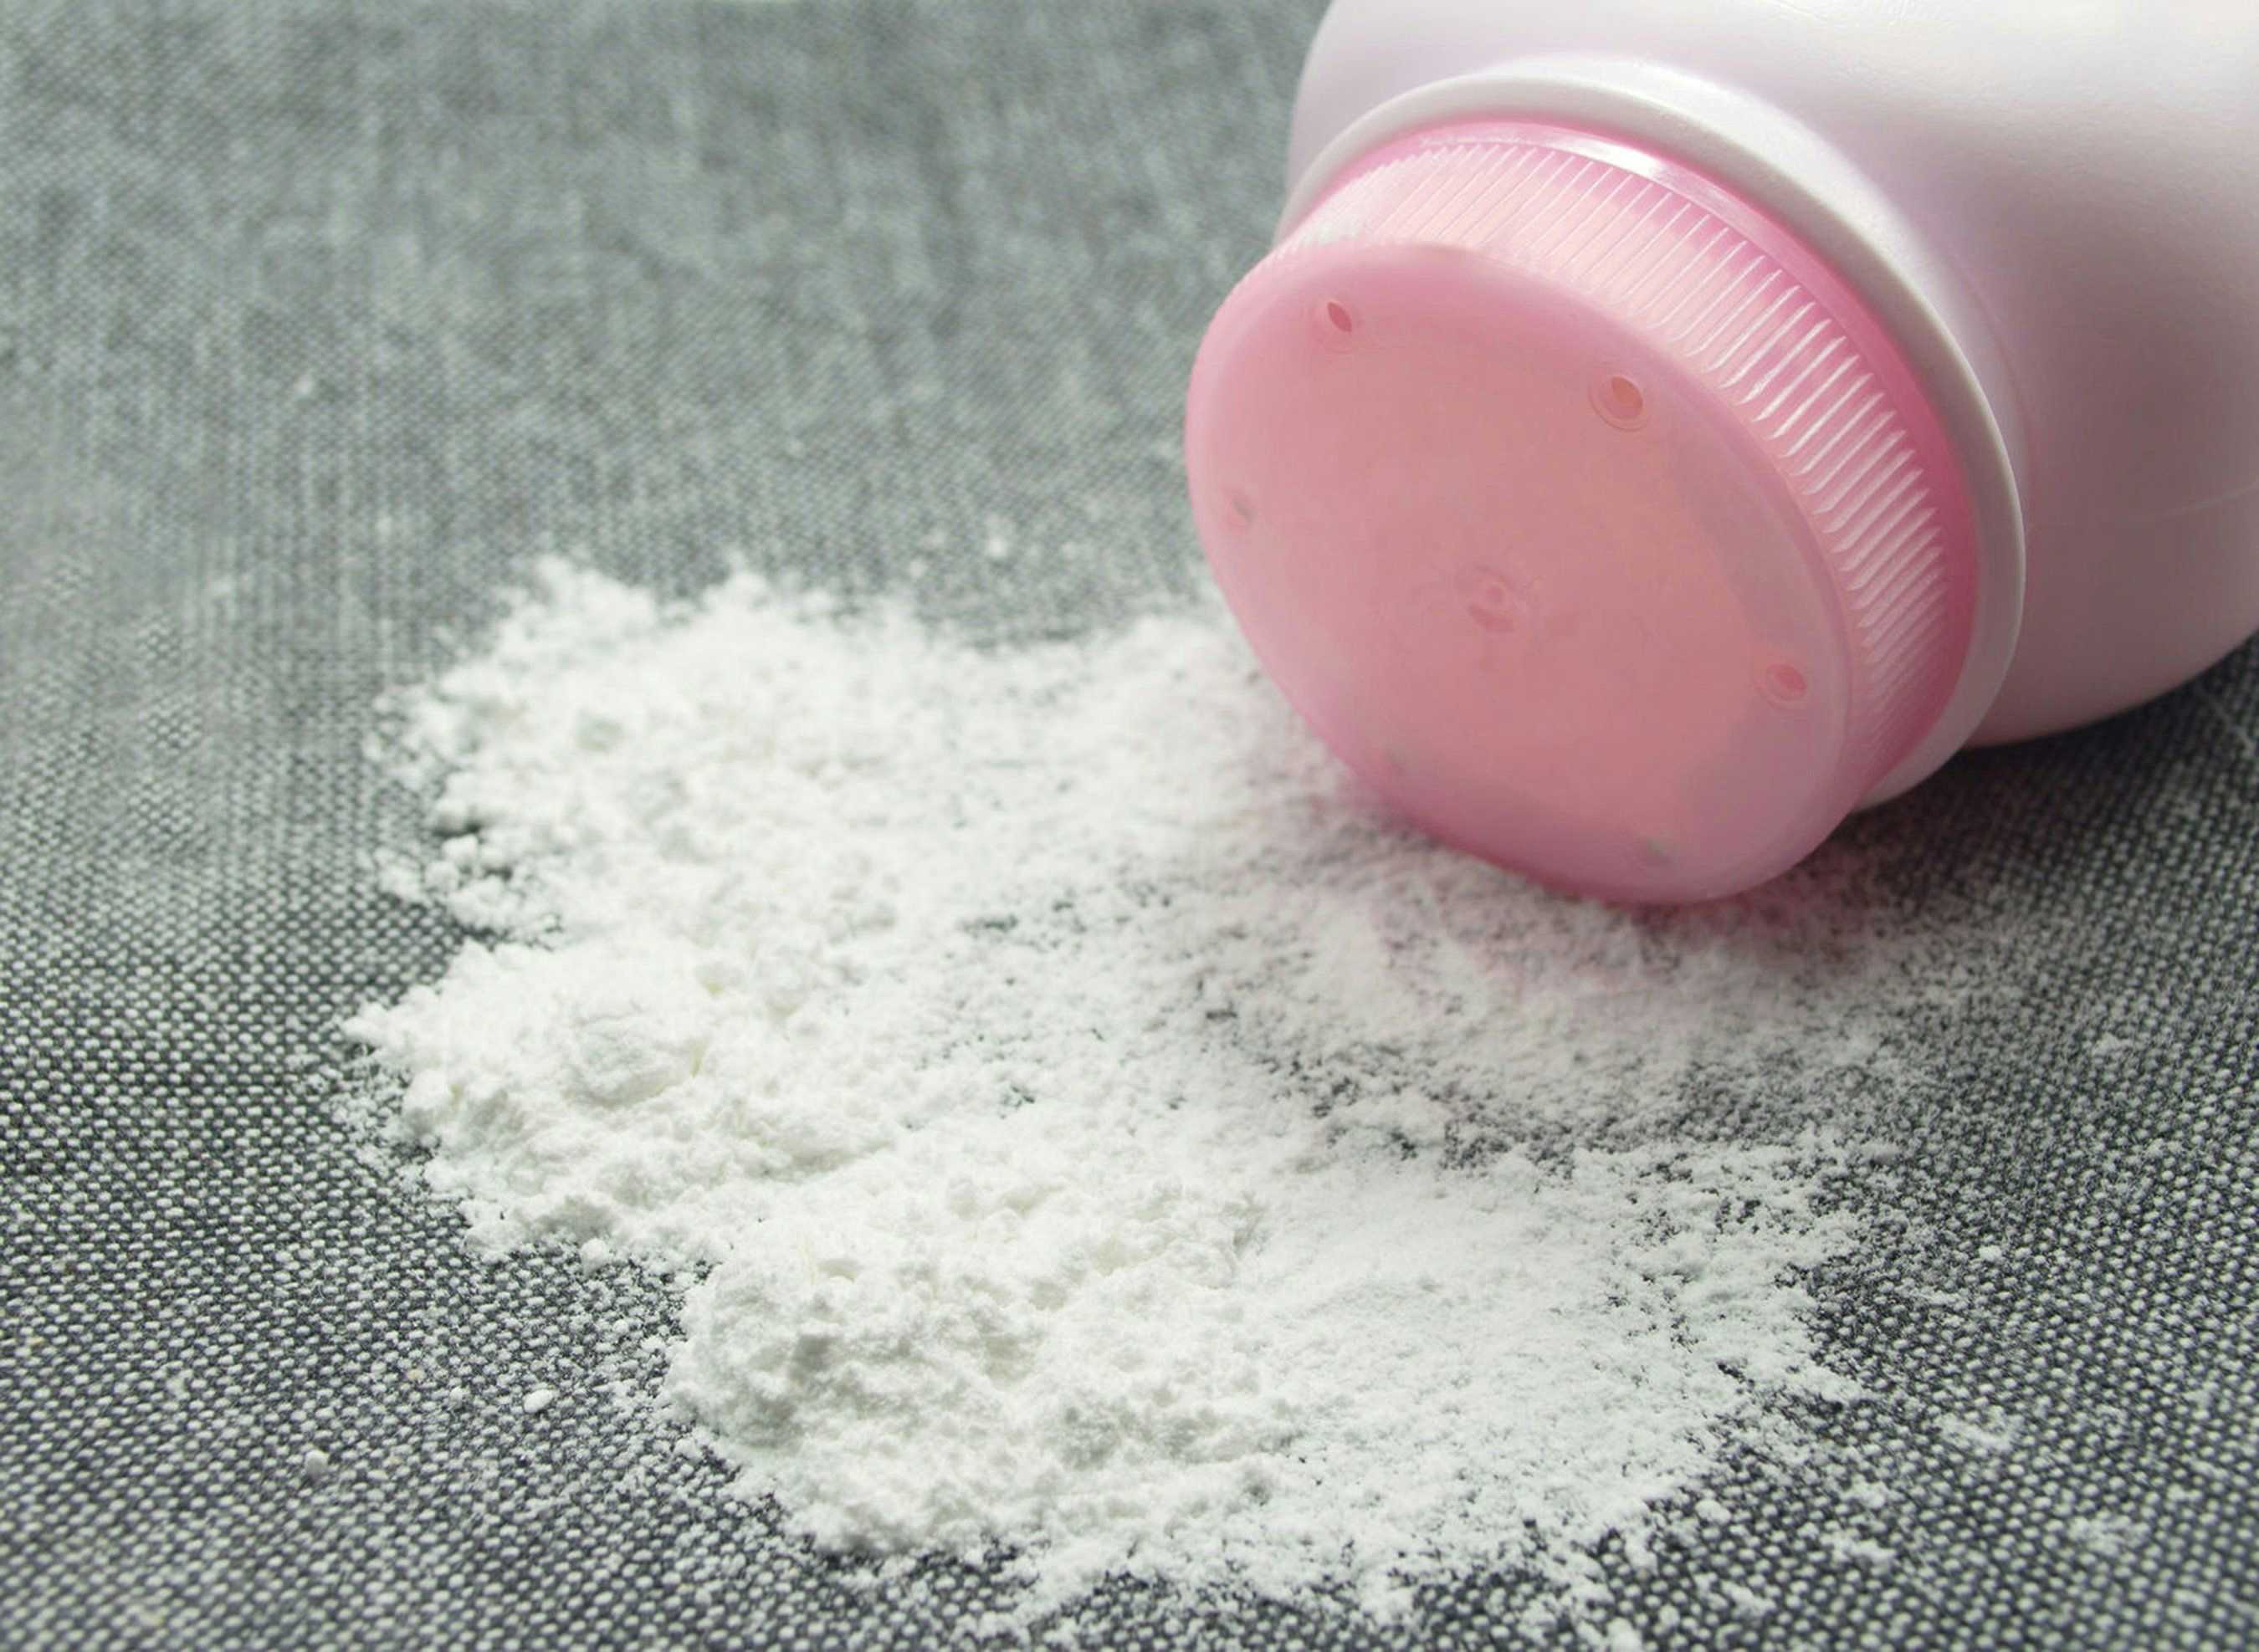 In Daubert Hearings, Johnson & Johnson Expert Testifies There is No Link Between Talc and Ovarian Cancer